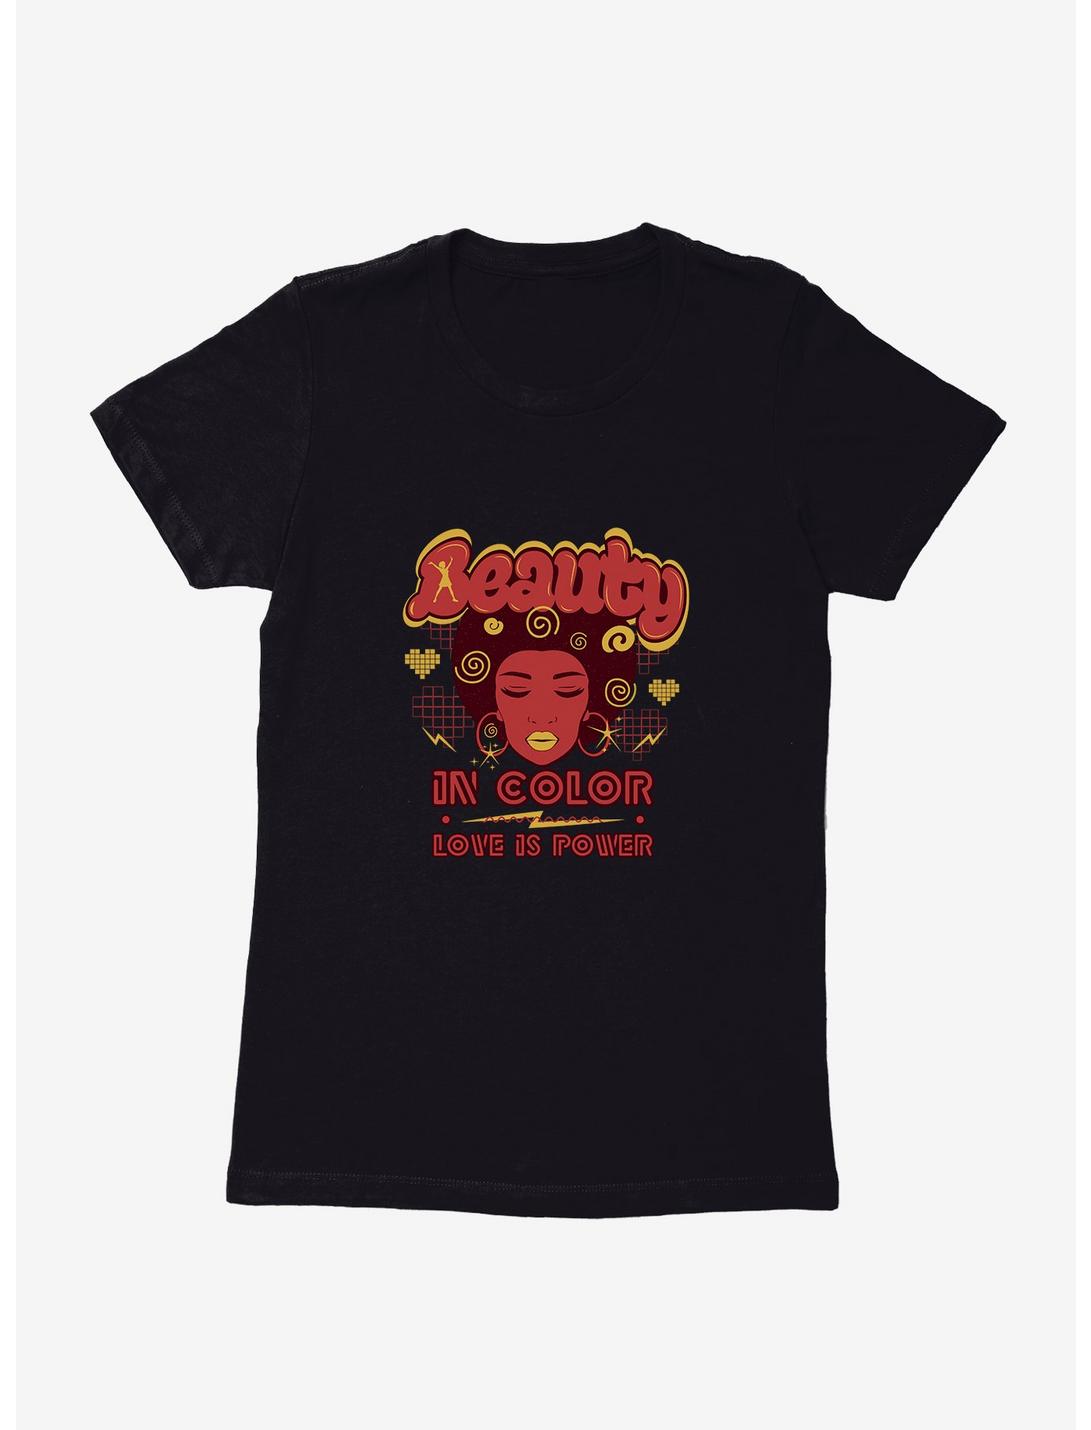 Black History Month Beauty In Color Womens T-Shirt, , hi-res